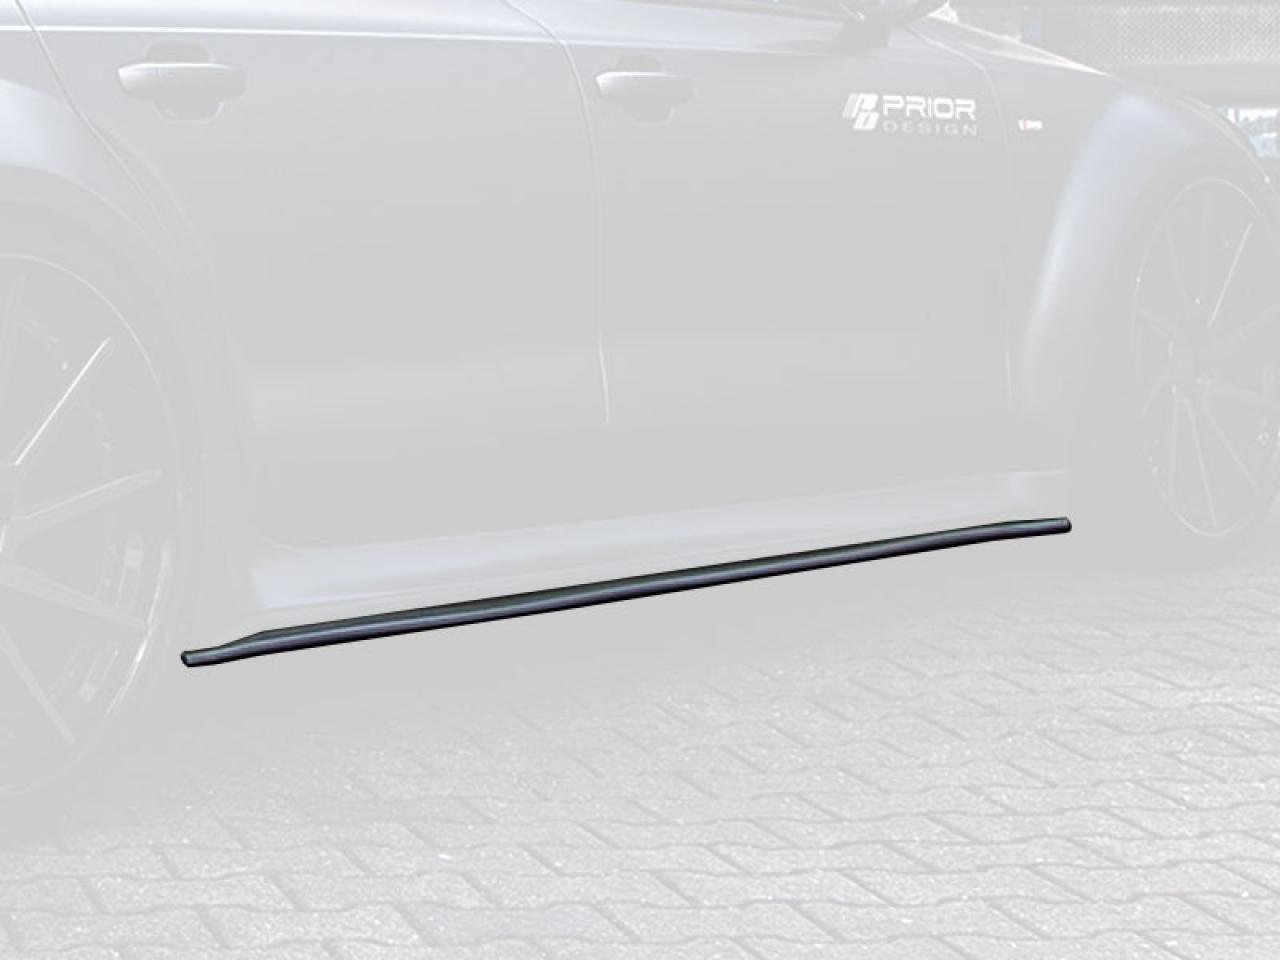 PD700R Add-On Lip Spoiler for Audi A7/S7/RS7 C7